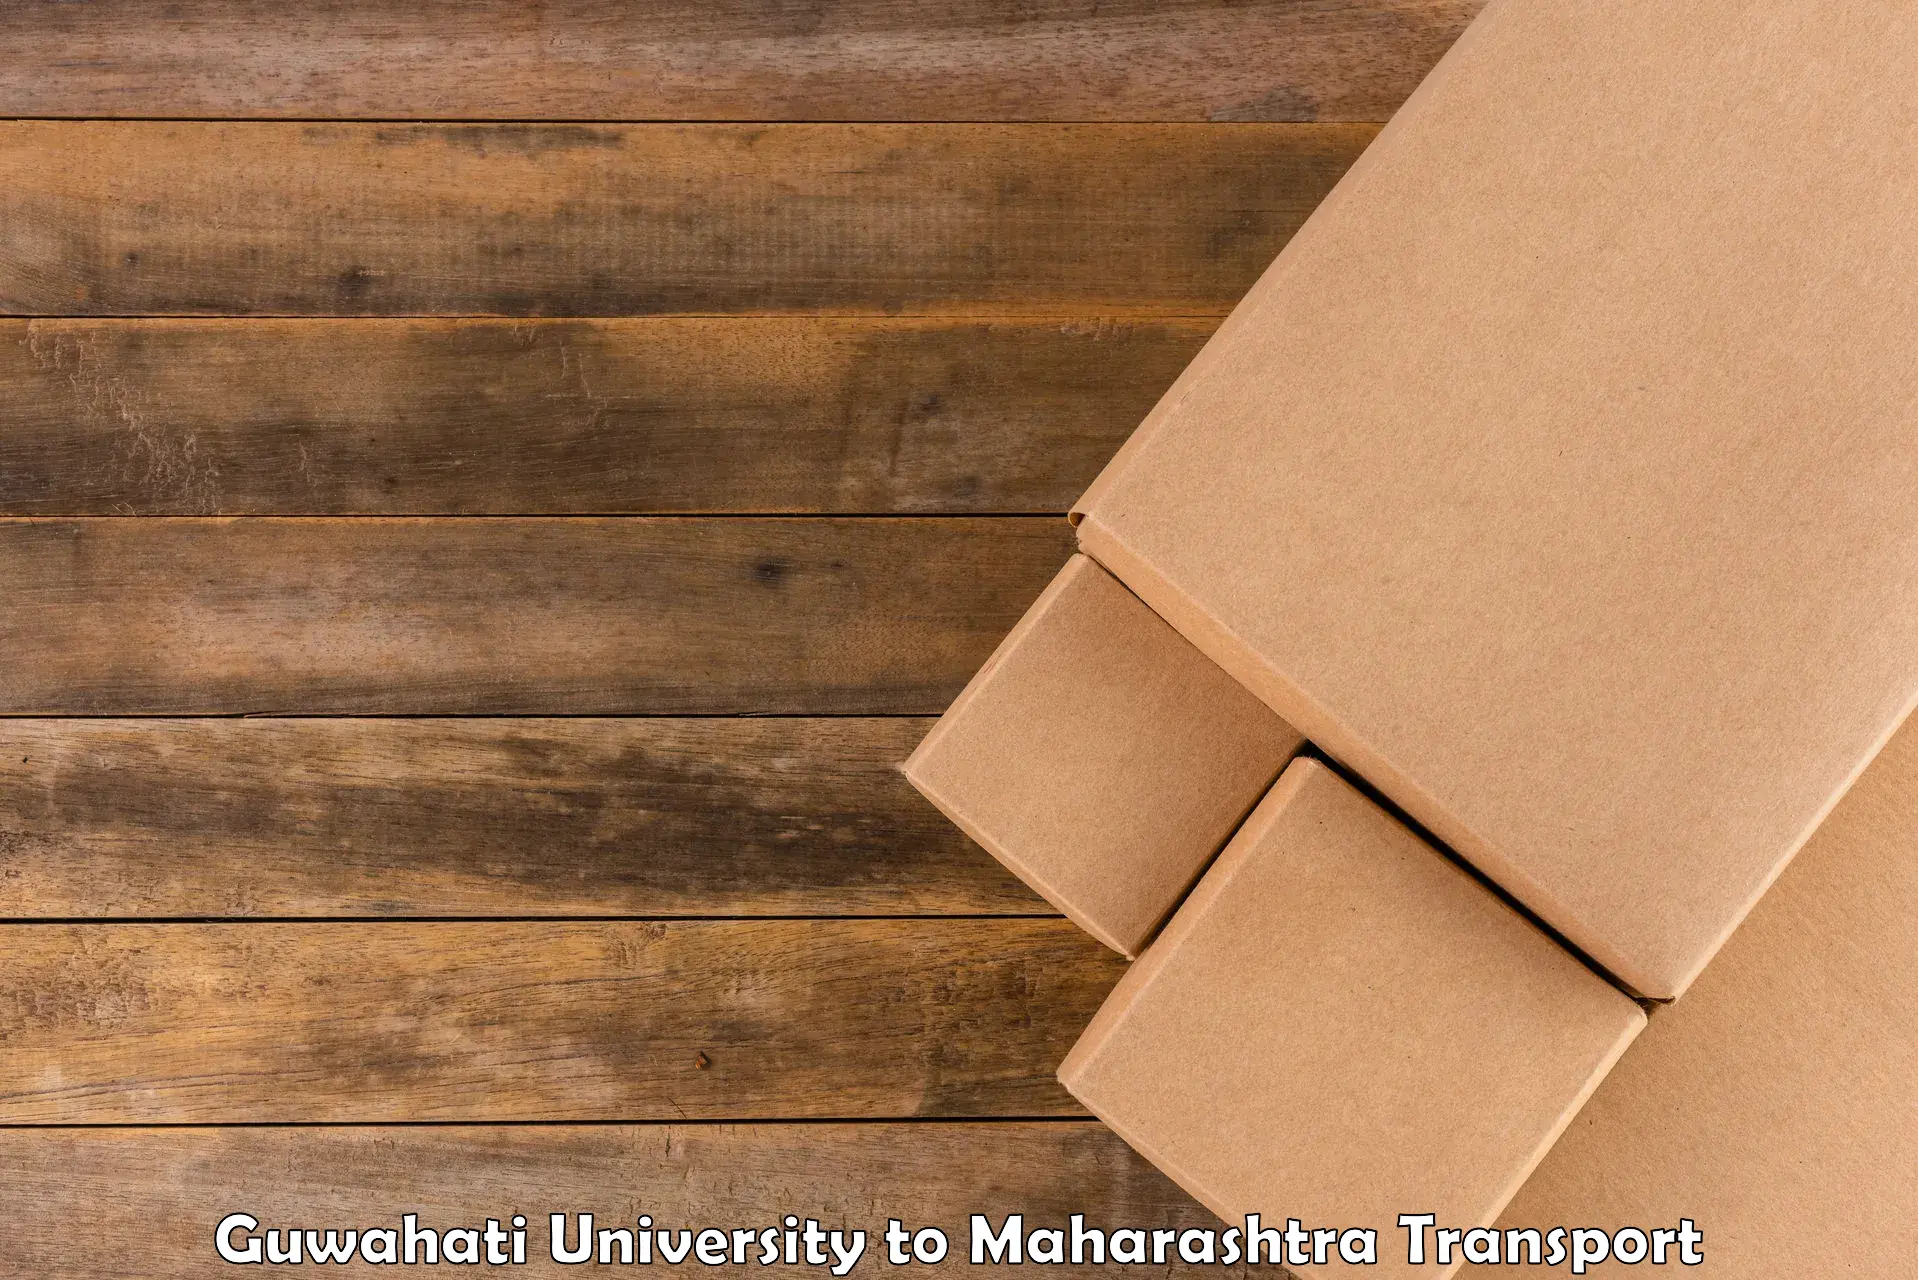 Container transportation services Guwahati University to Rajapur